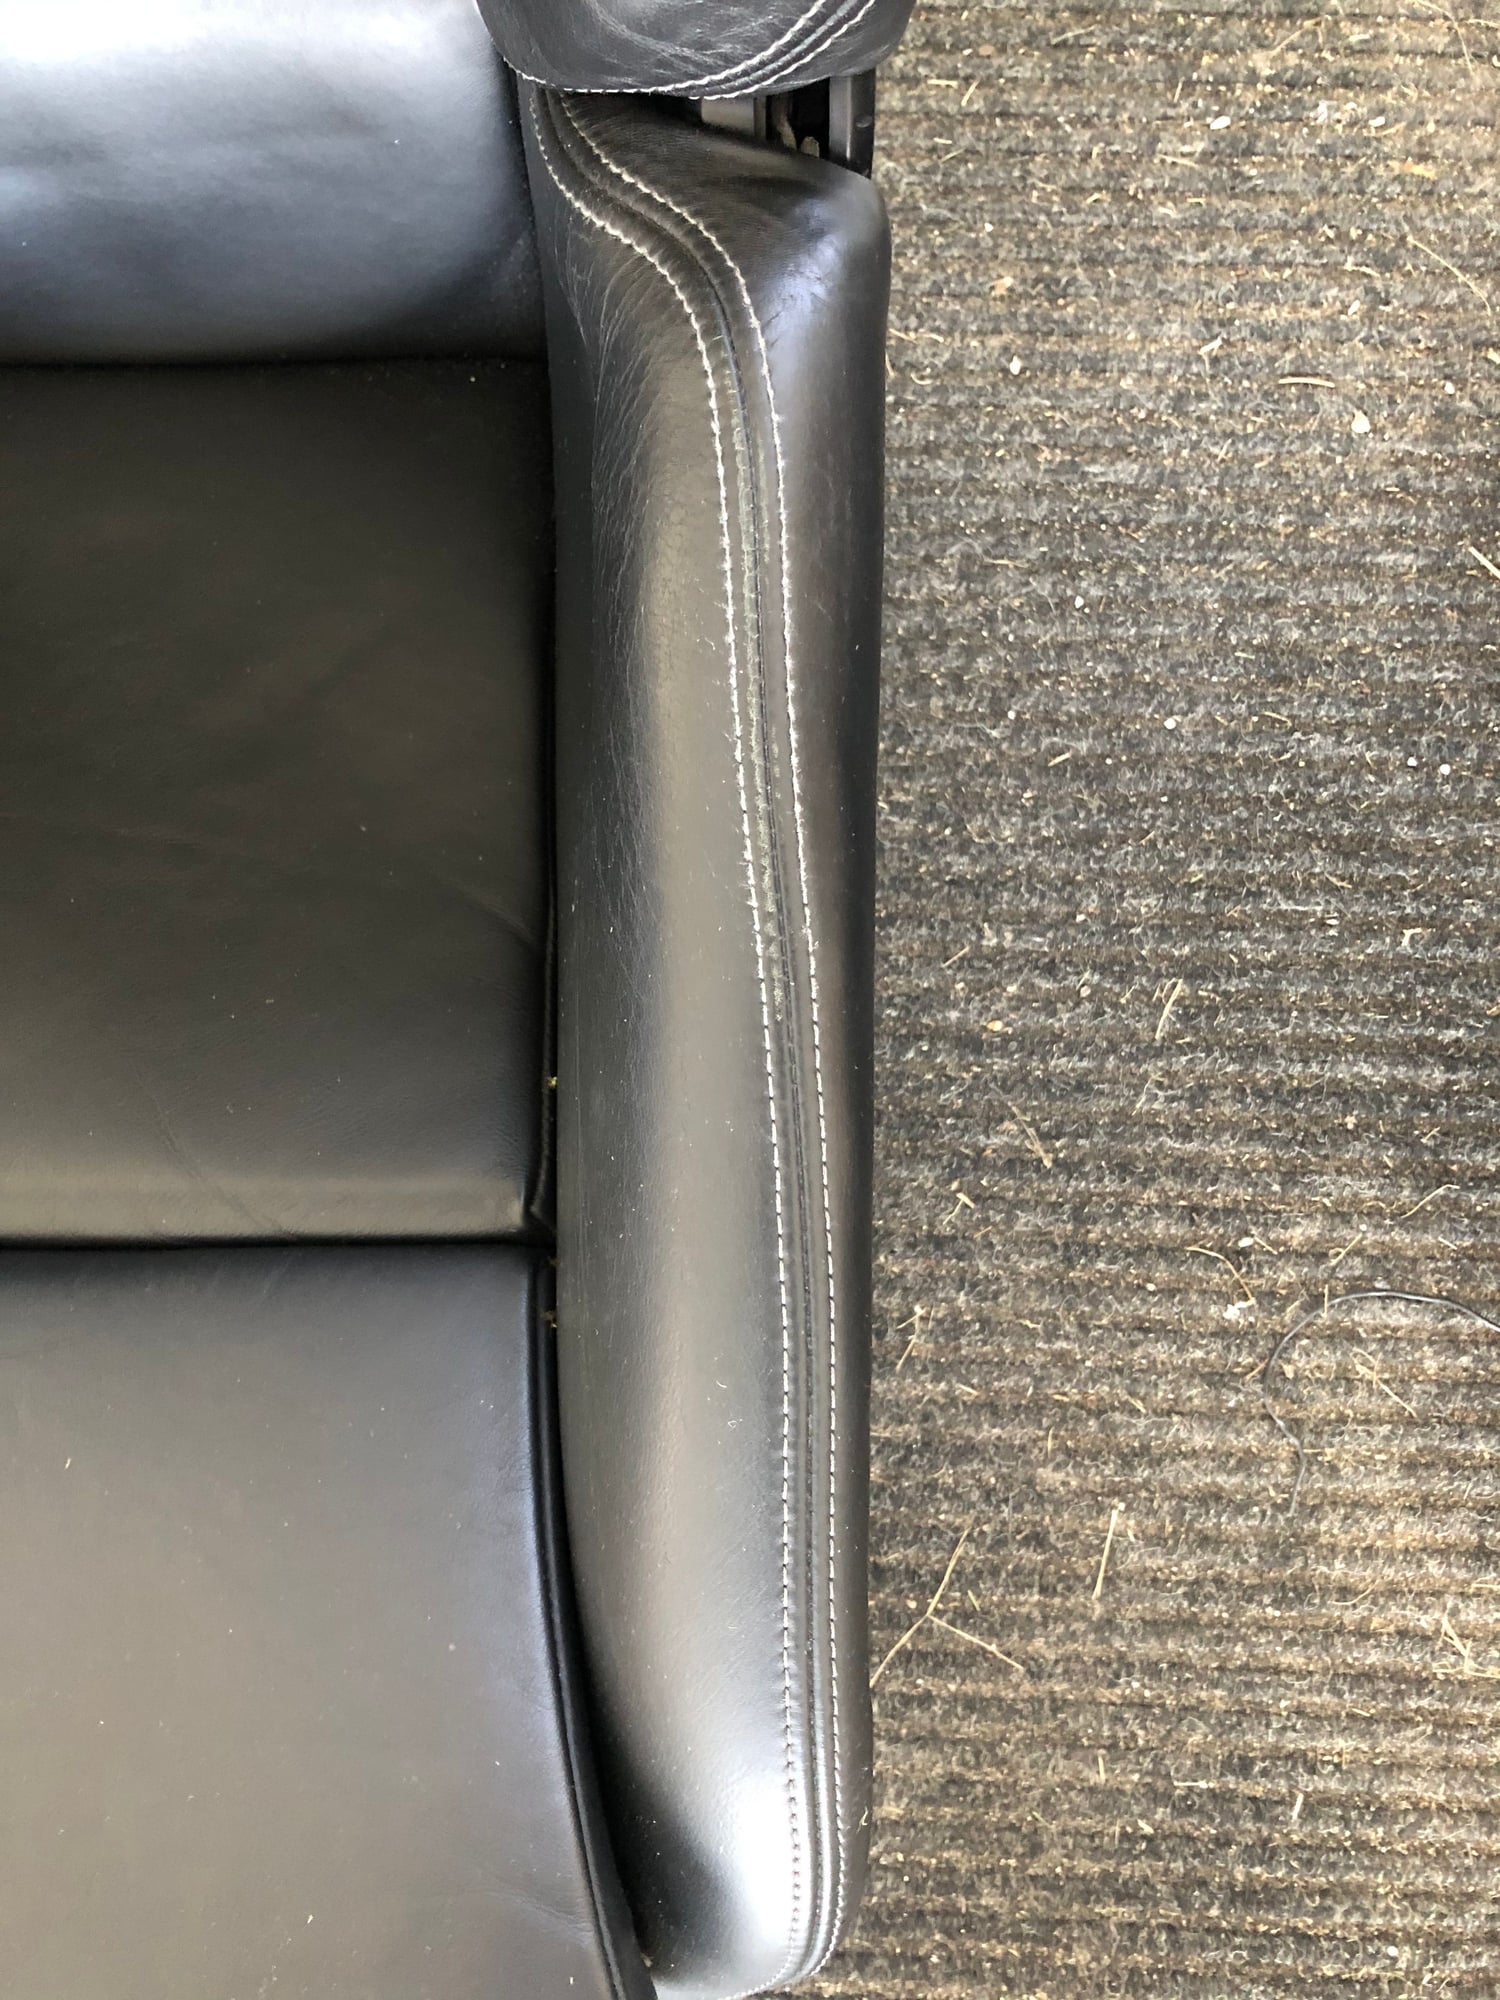 Interior/Upholstery - 997 GT2 Carbon Bucket Seats - Used - 2005 to 2011 Porsche GT2 - 2005 to 2011 Porsche GT3 - 2005 to 2011 Porsche Carrera - Downers Grove, IL 60516, United States